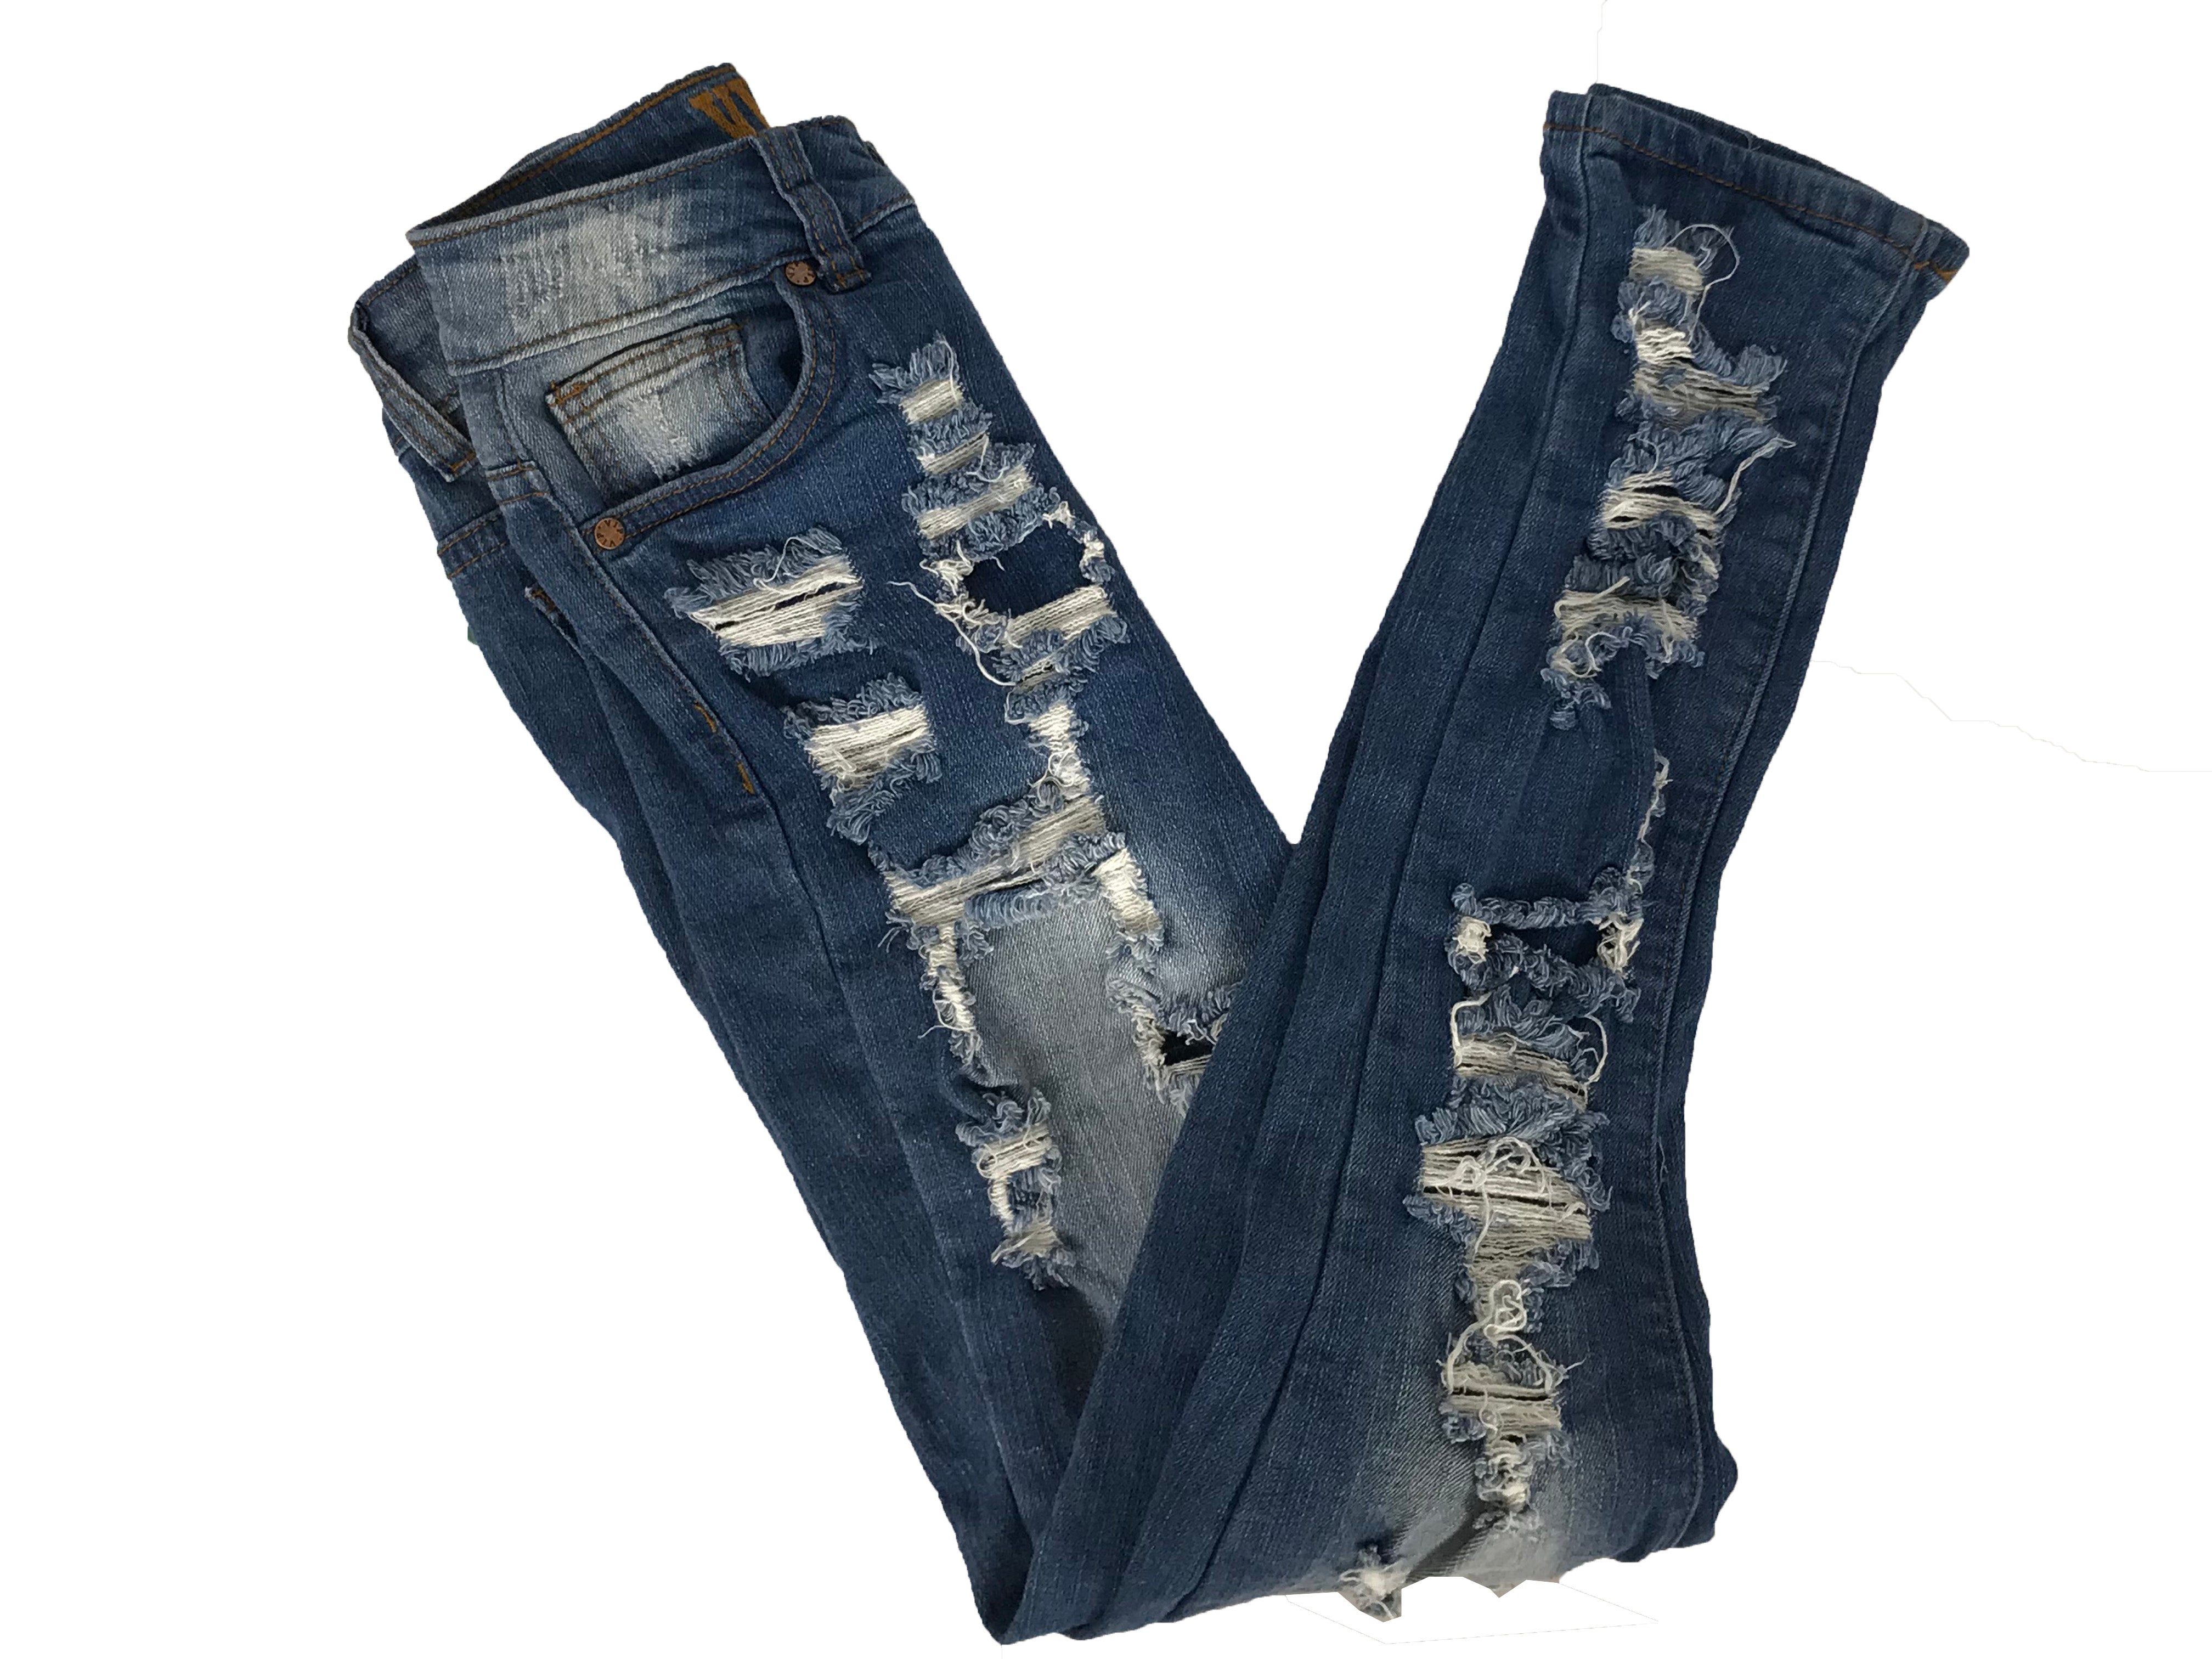 VIP Distressed Skinny Jeans Women's Size 3/4